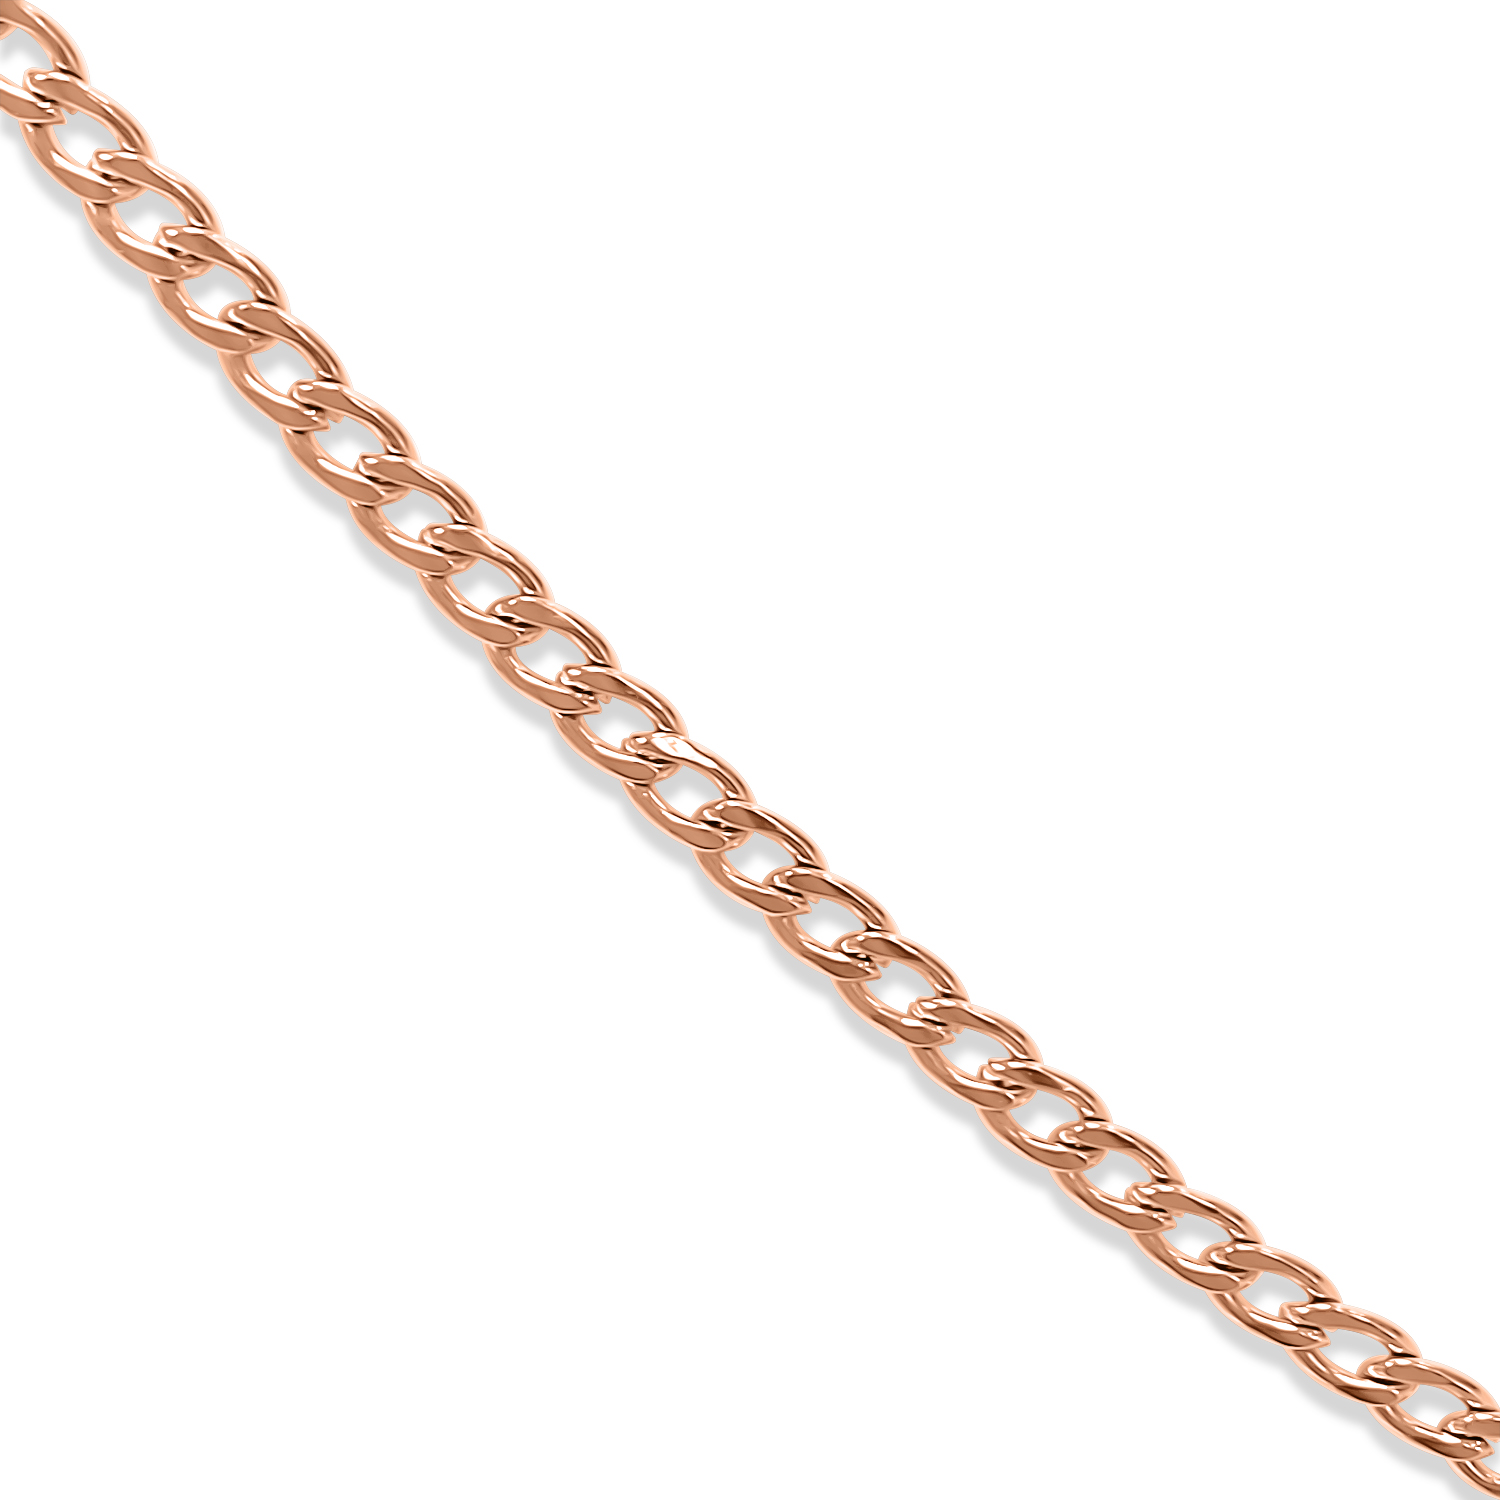 Mens Rose Gold Chain Necklace | 18 Inches | 20 Inches | 4mm Width | CubanSkinny | Alfred & Co. London